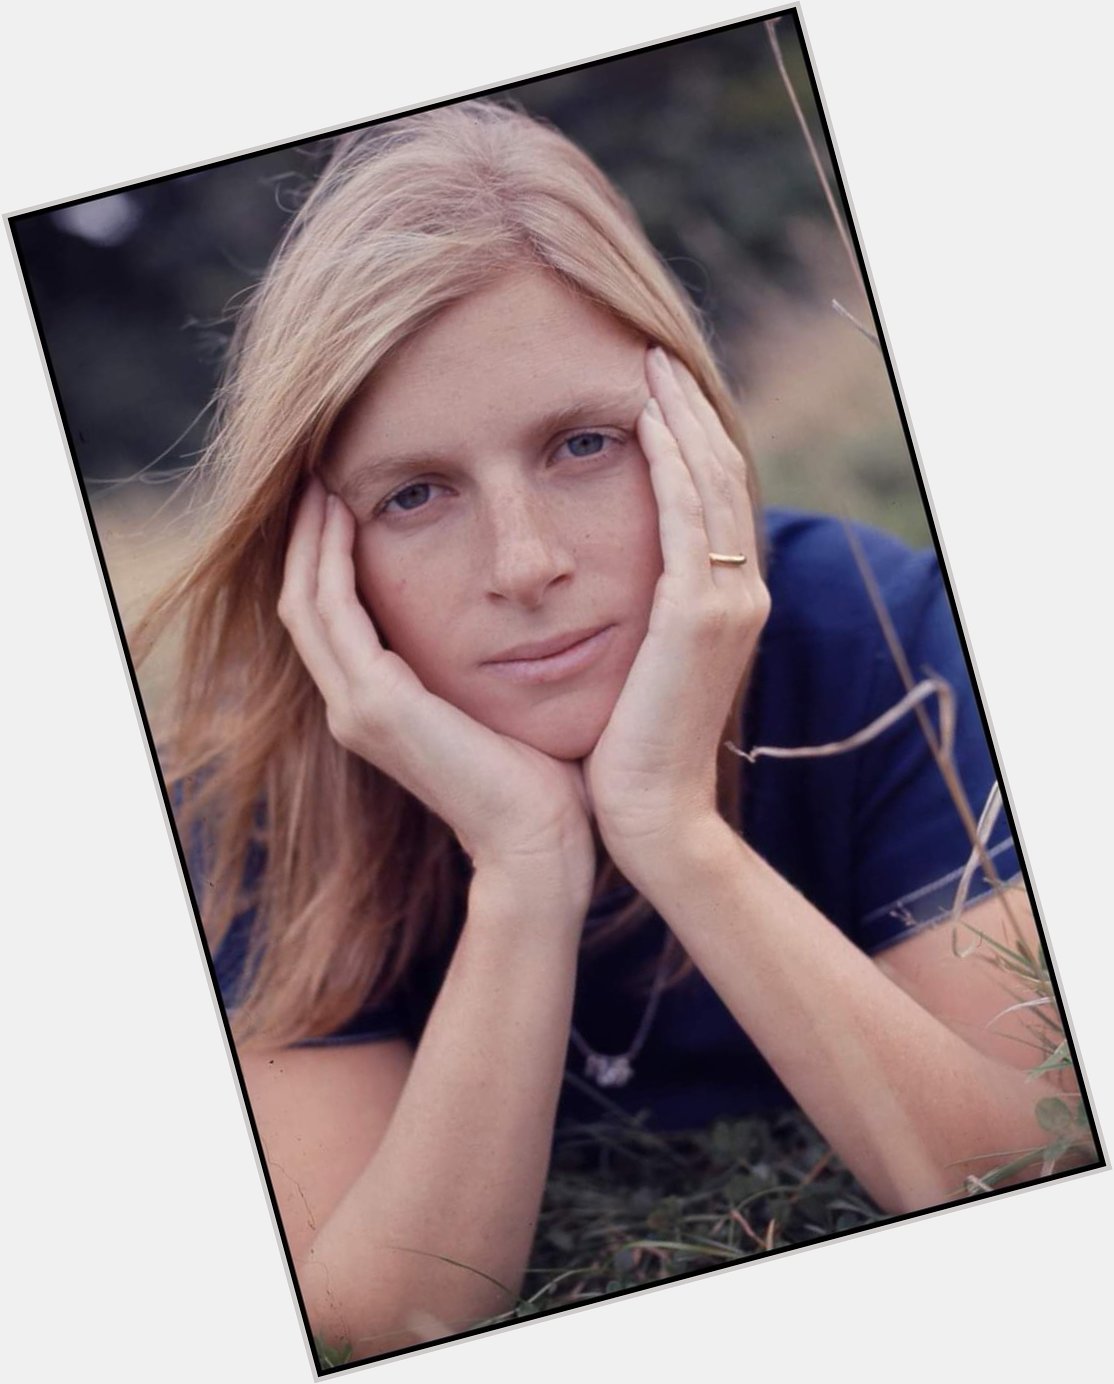  LINDA MCCARTNEY WOULD HAVE TURNED 80 TODAY LET\S ALL WISH HER A HAPPY BIRTHDAY IN HEAVEN AMEN   